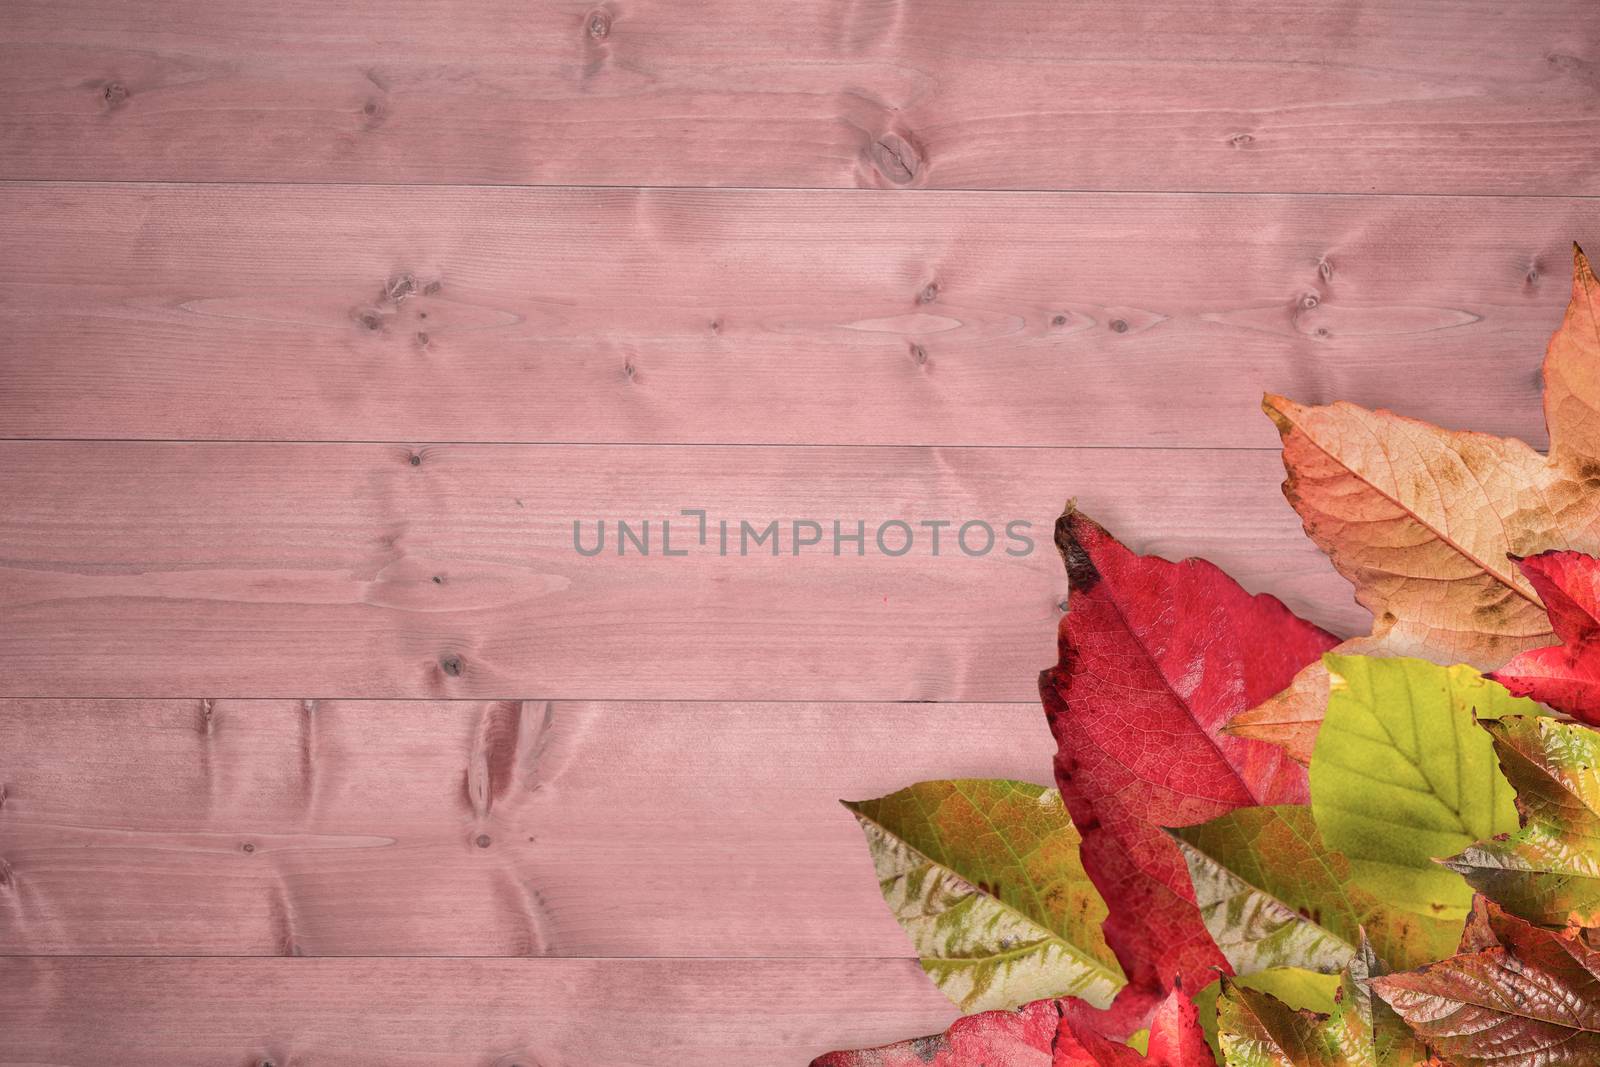 Composite image of autumn leaves pattern by Wavebreakmedia